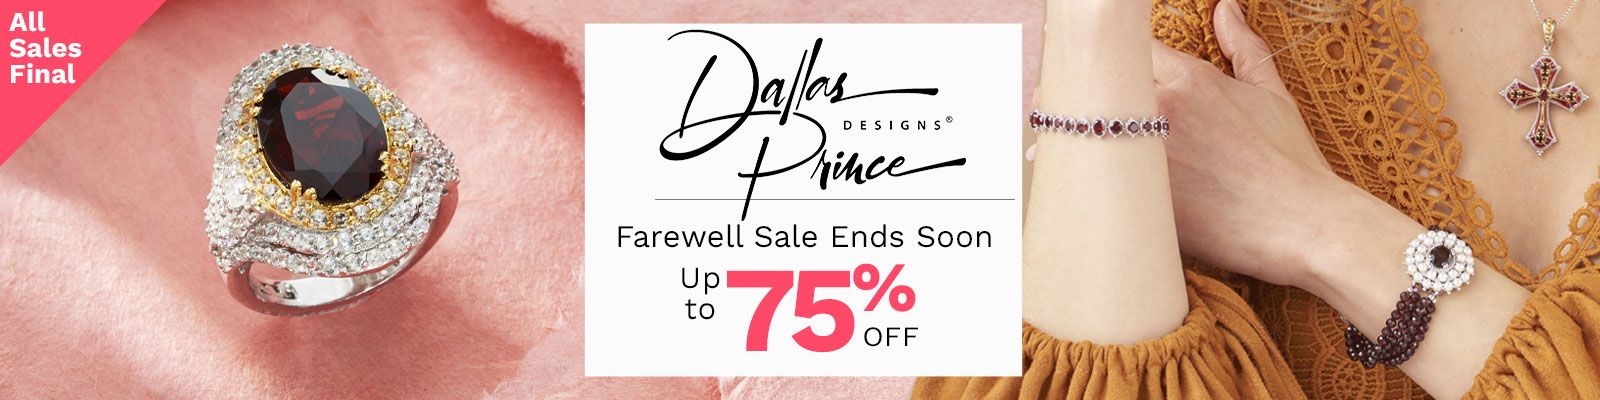 Dallas Prince Farewell Sale Up to 75% Off | 204-910, 204-910,